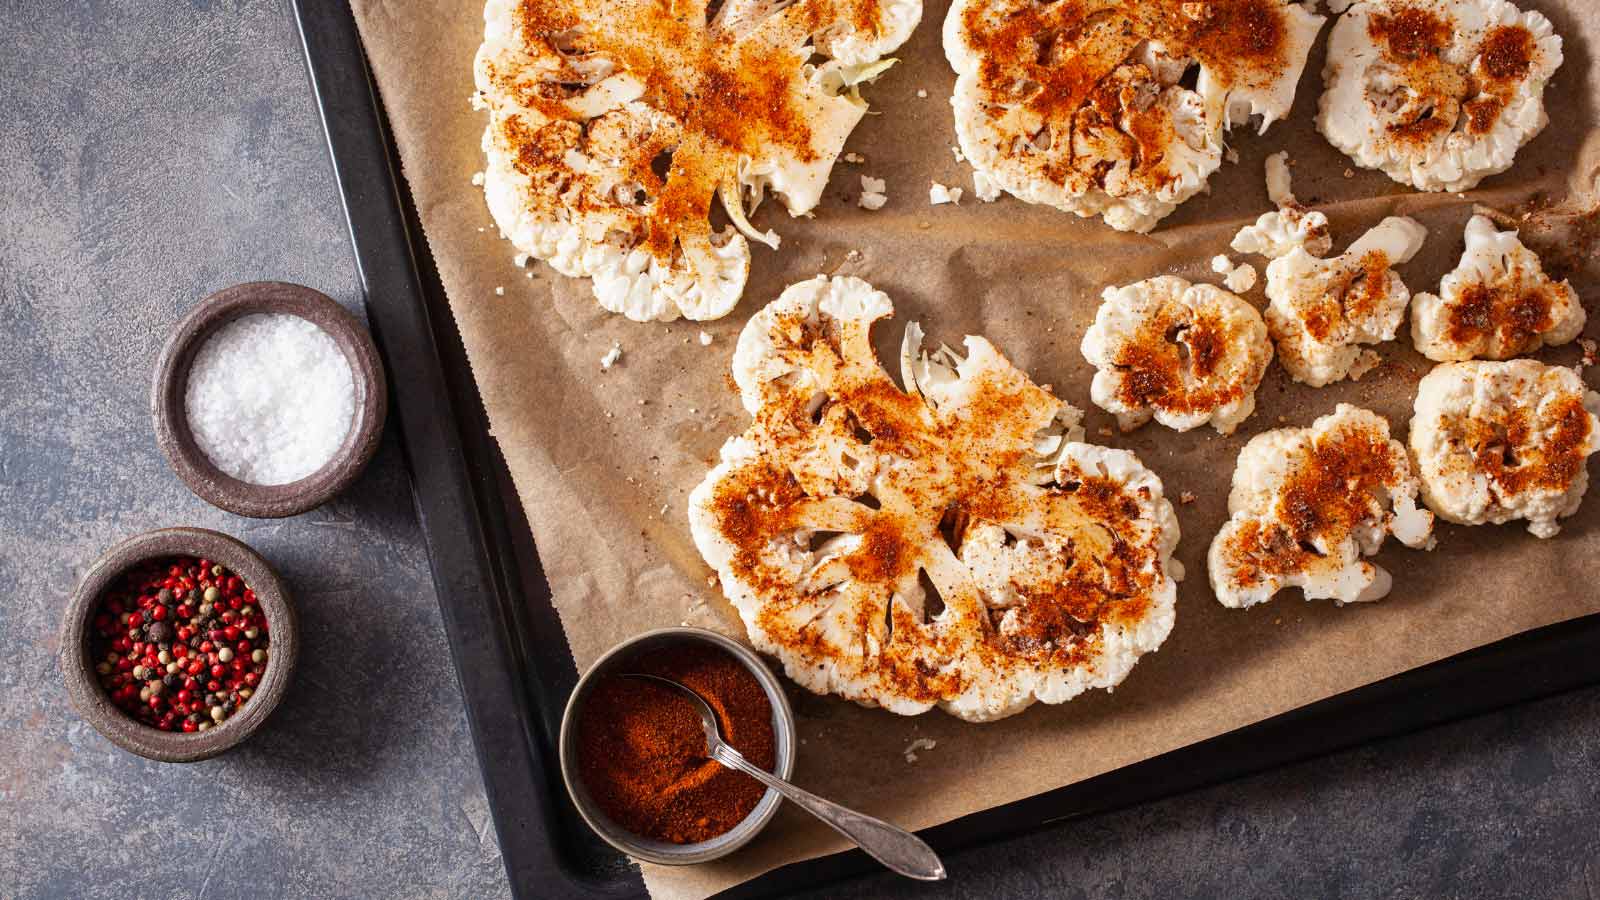 Cauliflower steaks with spice on baking tray.